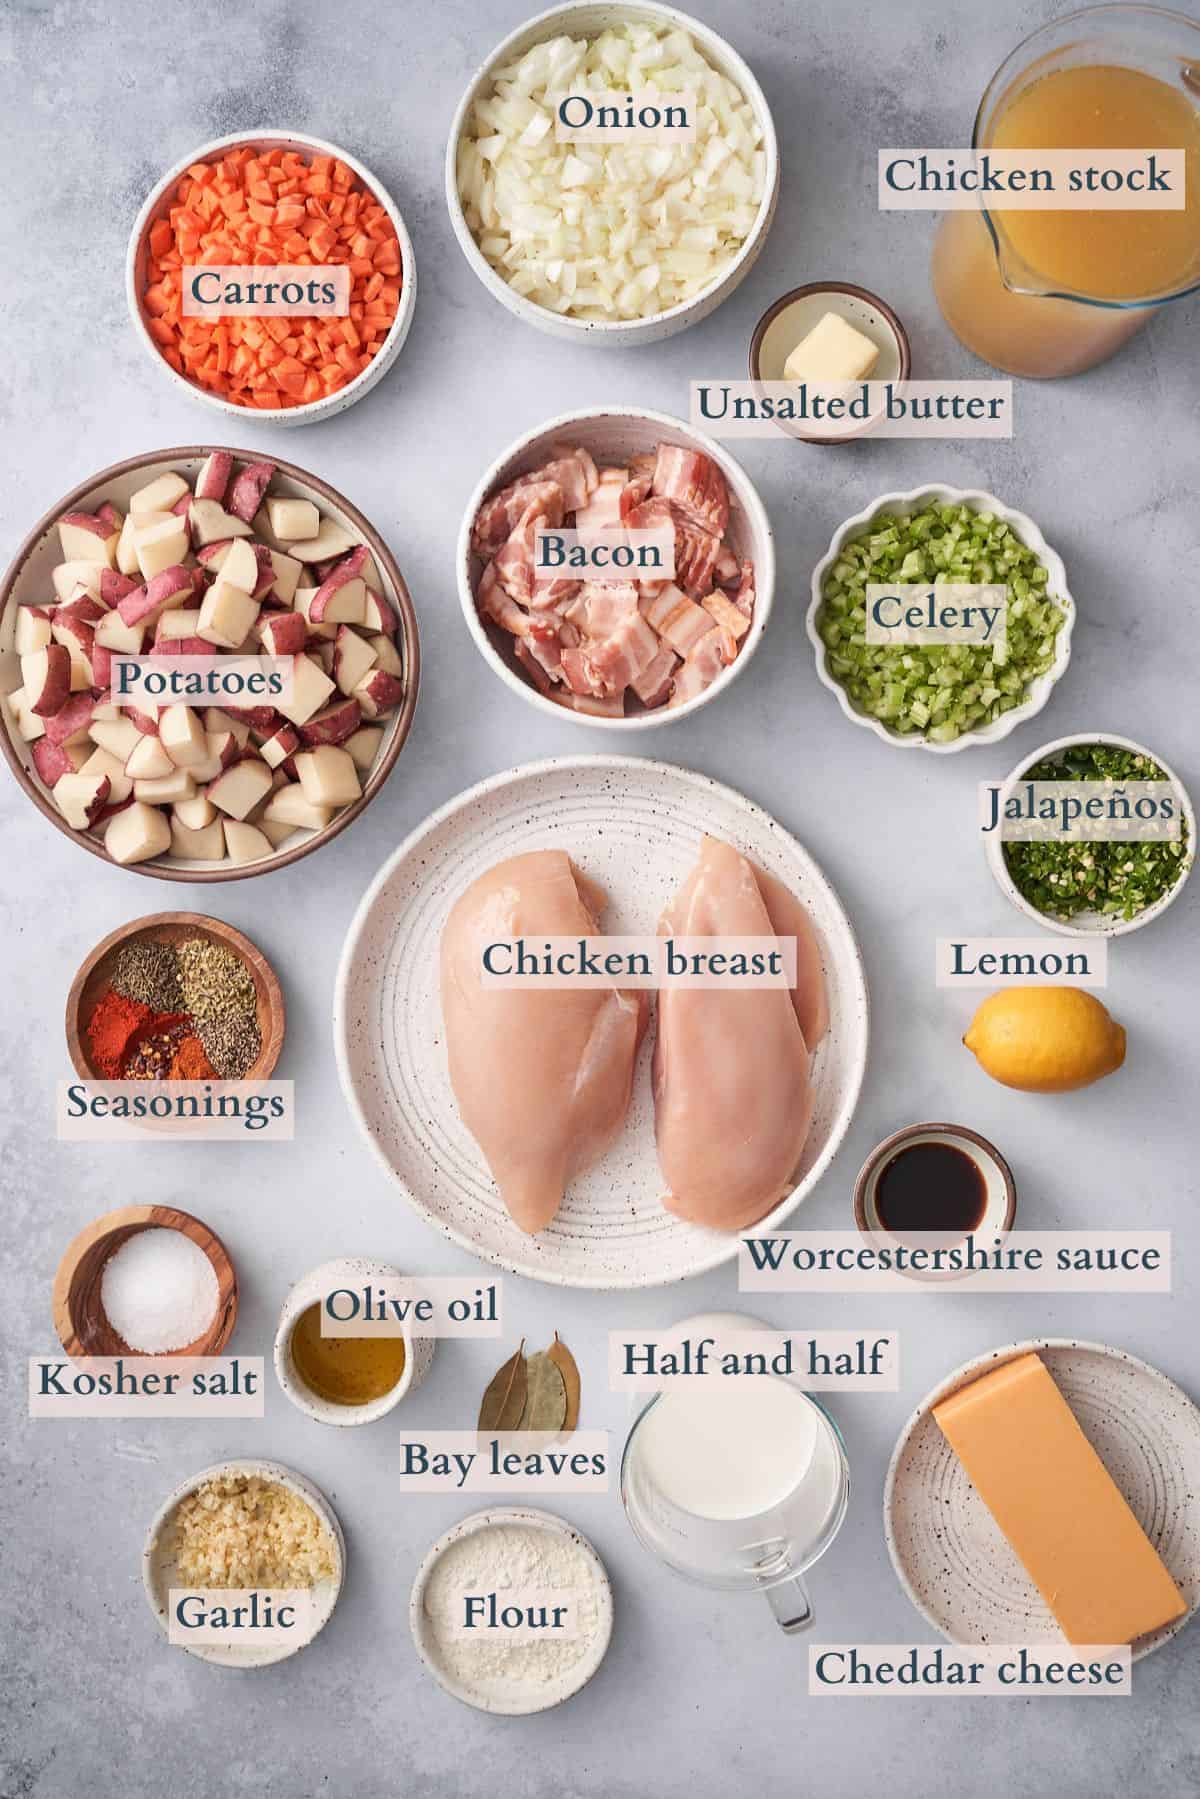 ingredients to make chicken and potato soup with text overlaying each ingredient to denote the ingredient.